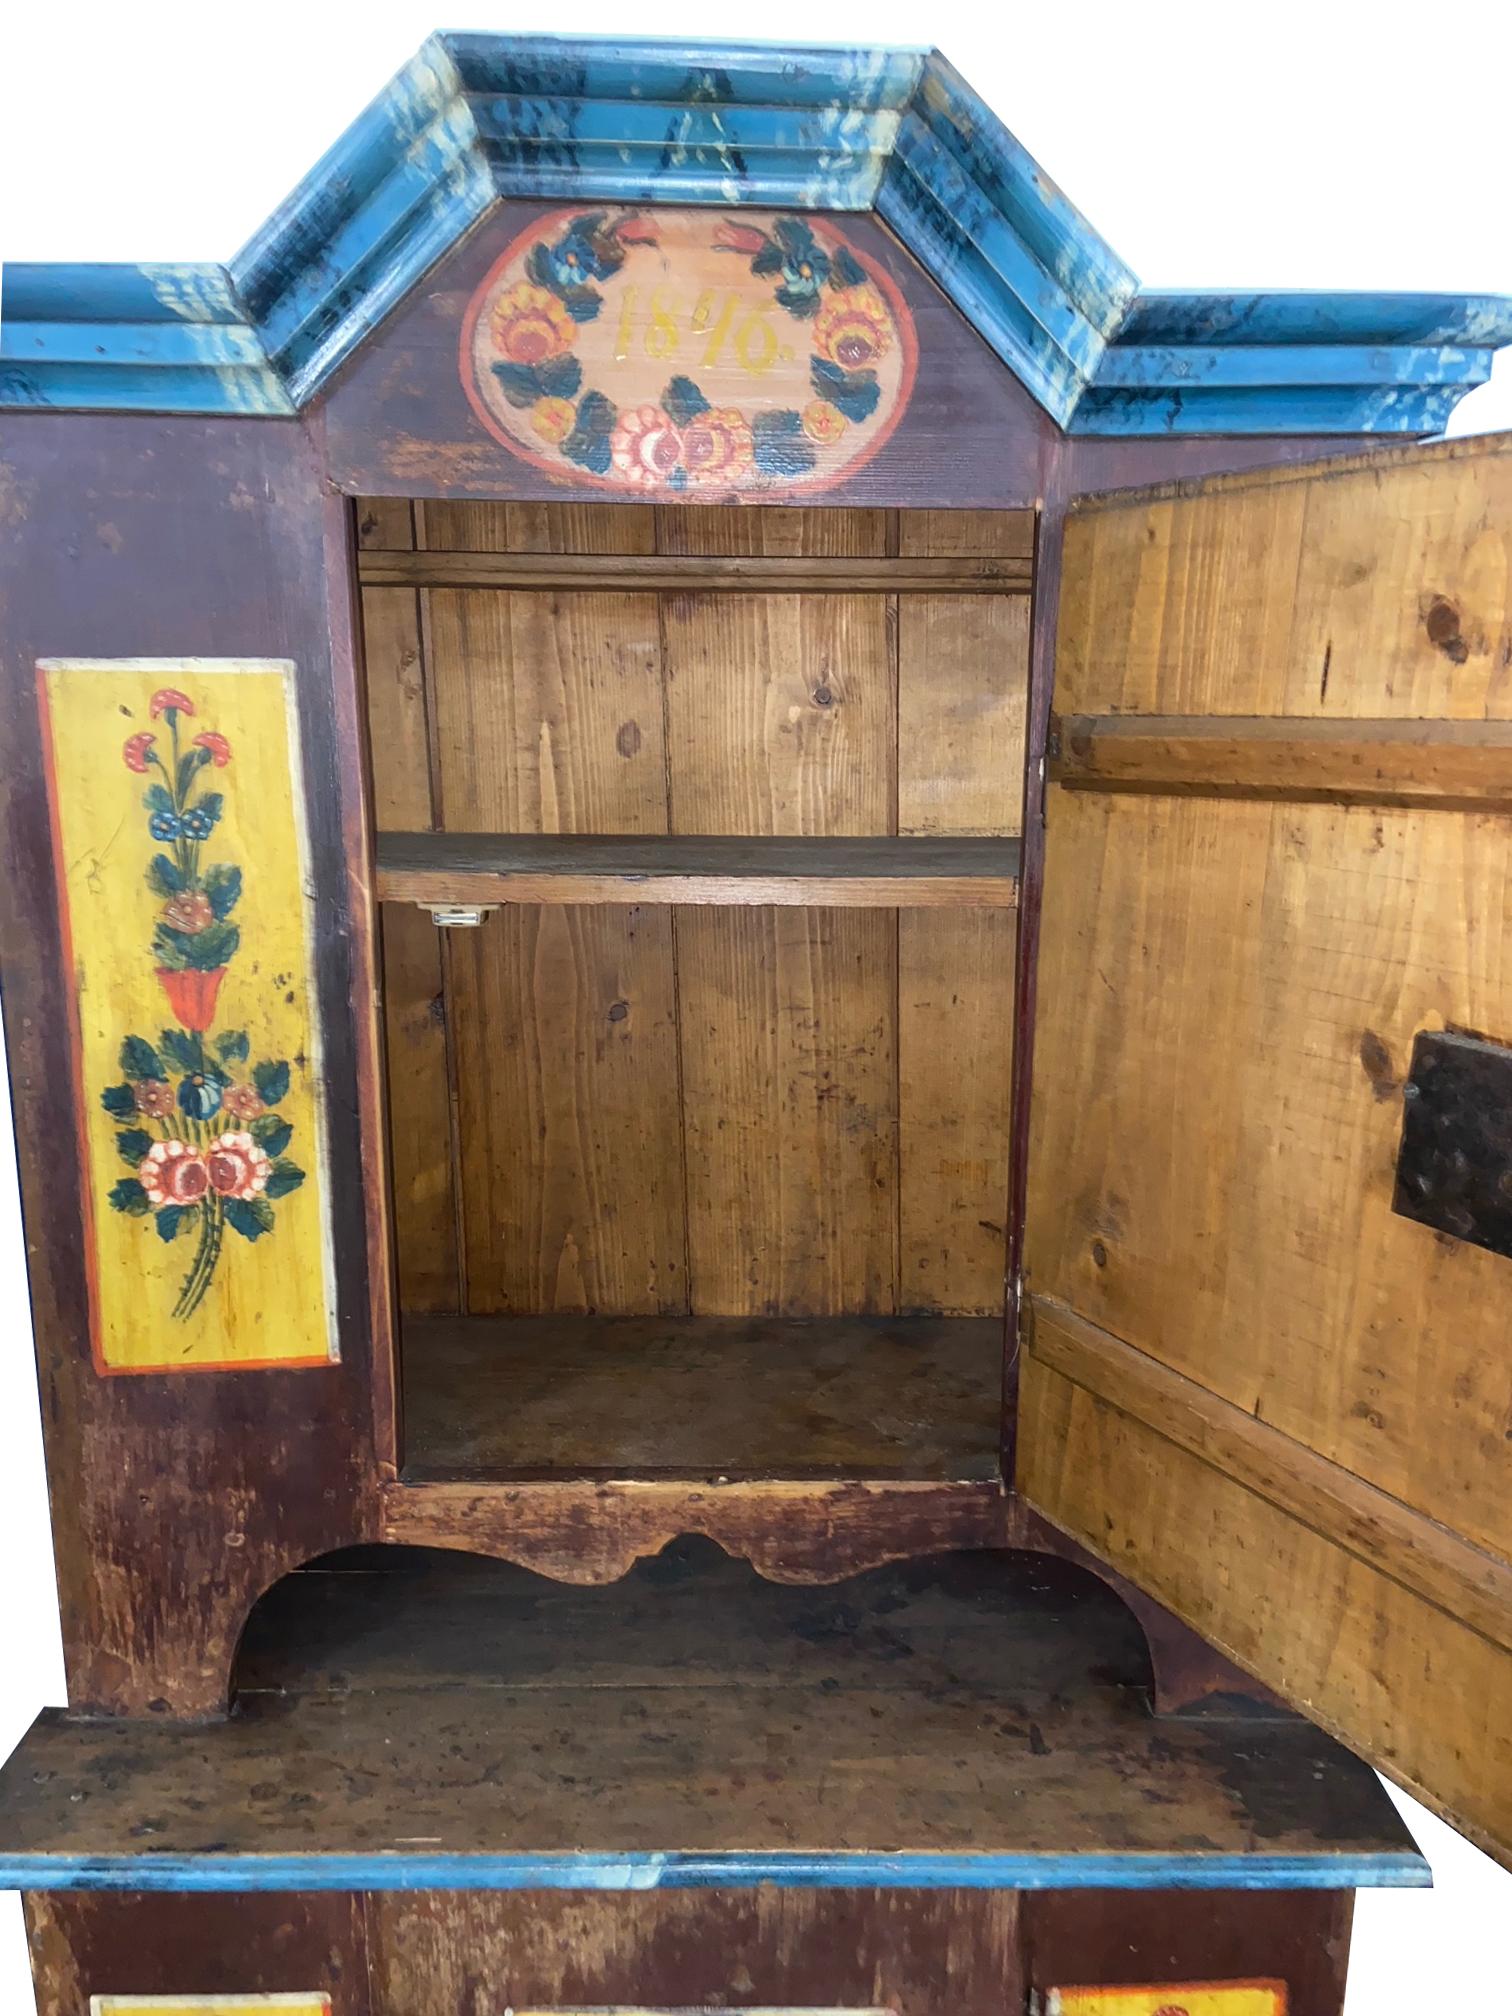 This burgundy cupboard features beautiful original hand-painted decorations throughout. Yellow panels portraying vases full of flowers adorn the doors and a blue painted cornice meant to resemble marble adorns the top.

Circa